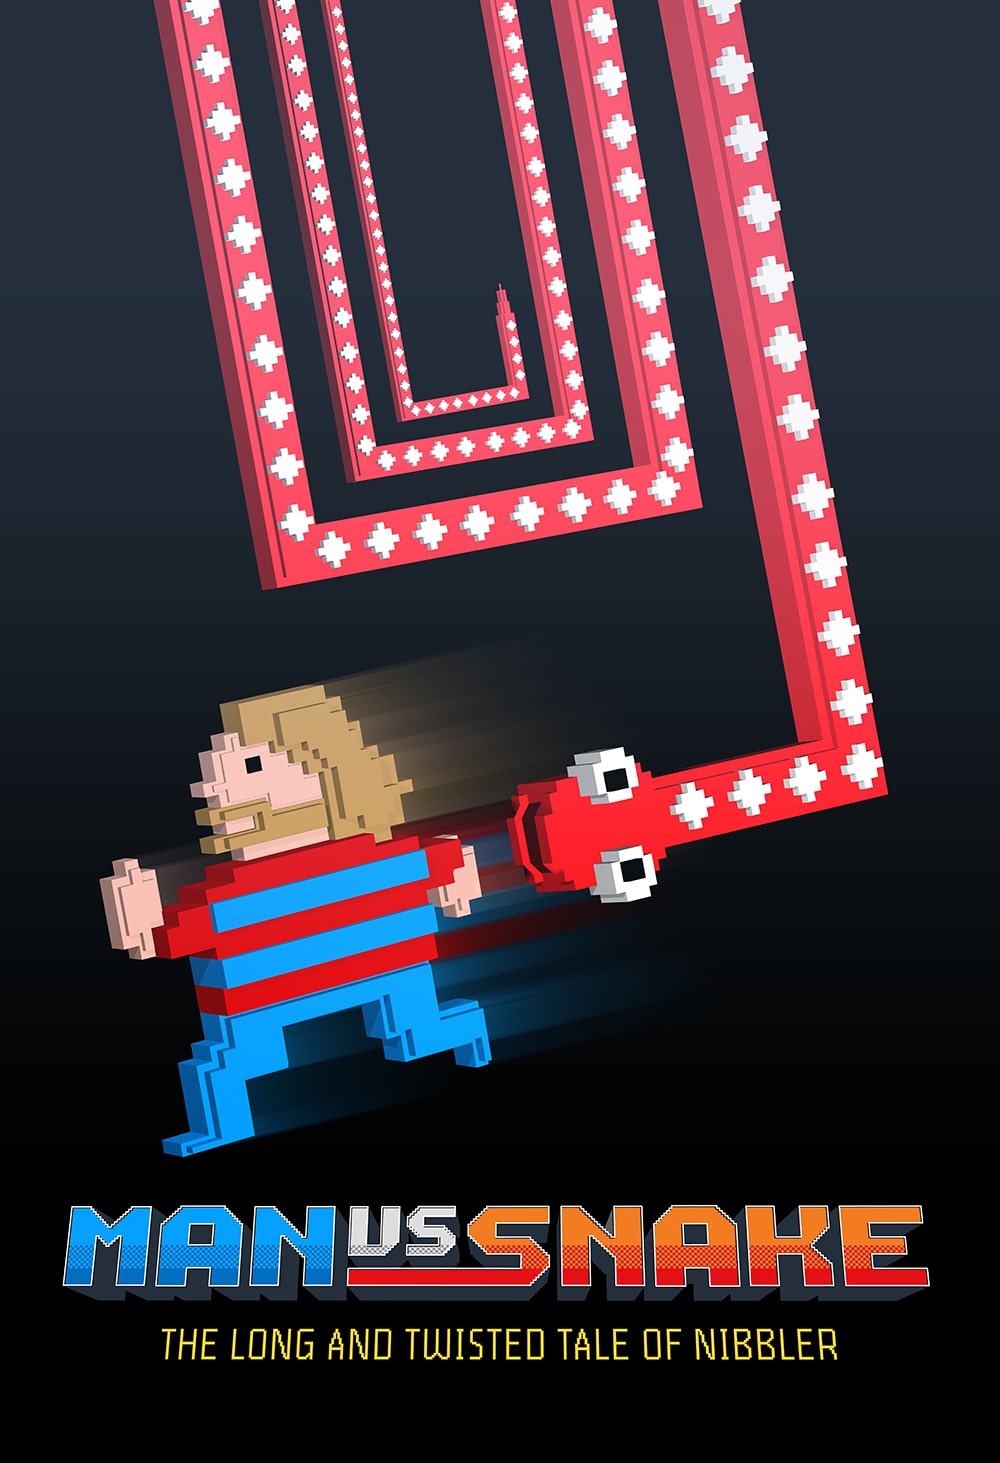 Movie poster for Man vs Snake, the Long and Twisted Tale of Nibbler. It shows the 8-bit Nibbler in a square coil shape, chasing an 8-bit depicton of a man running.